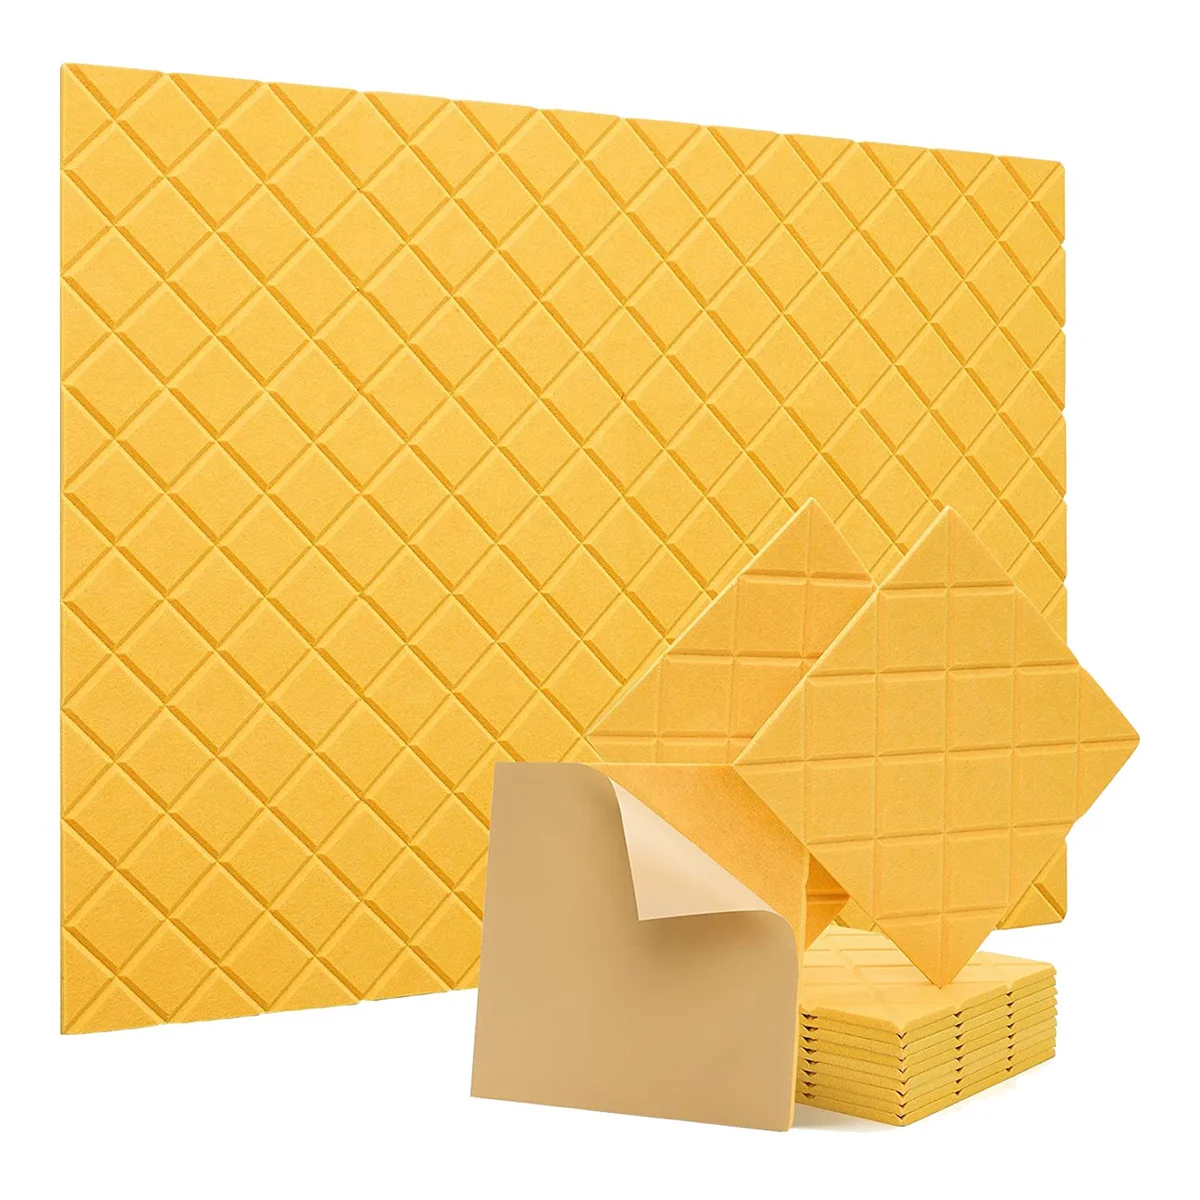 

12 Pack Soundproof Wall Panels,12x12x0.4In Self Adhesive Sound Absorbing Panels,for Recording Studio,Office,Yellow